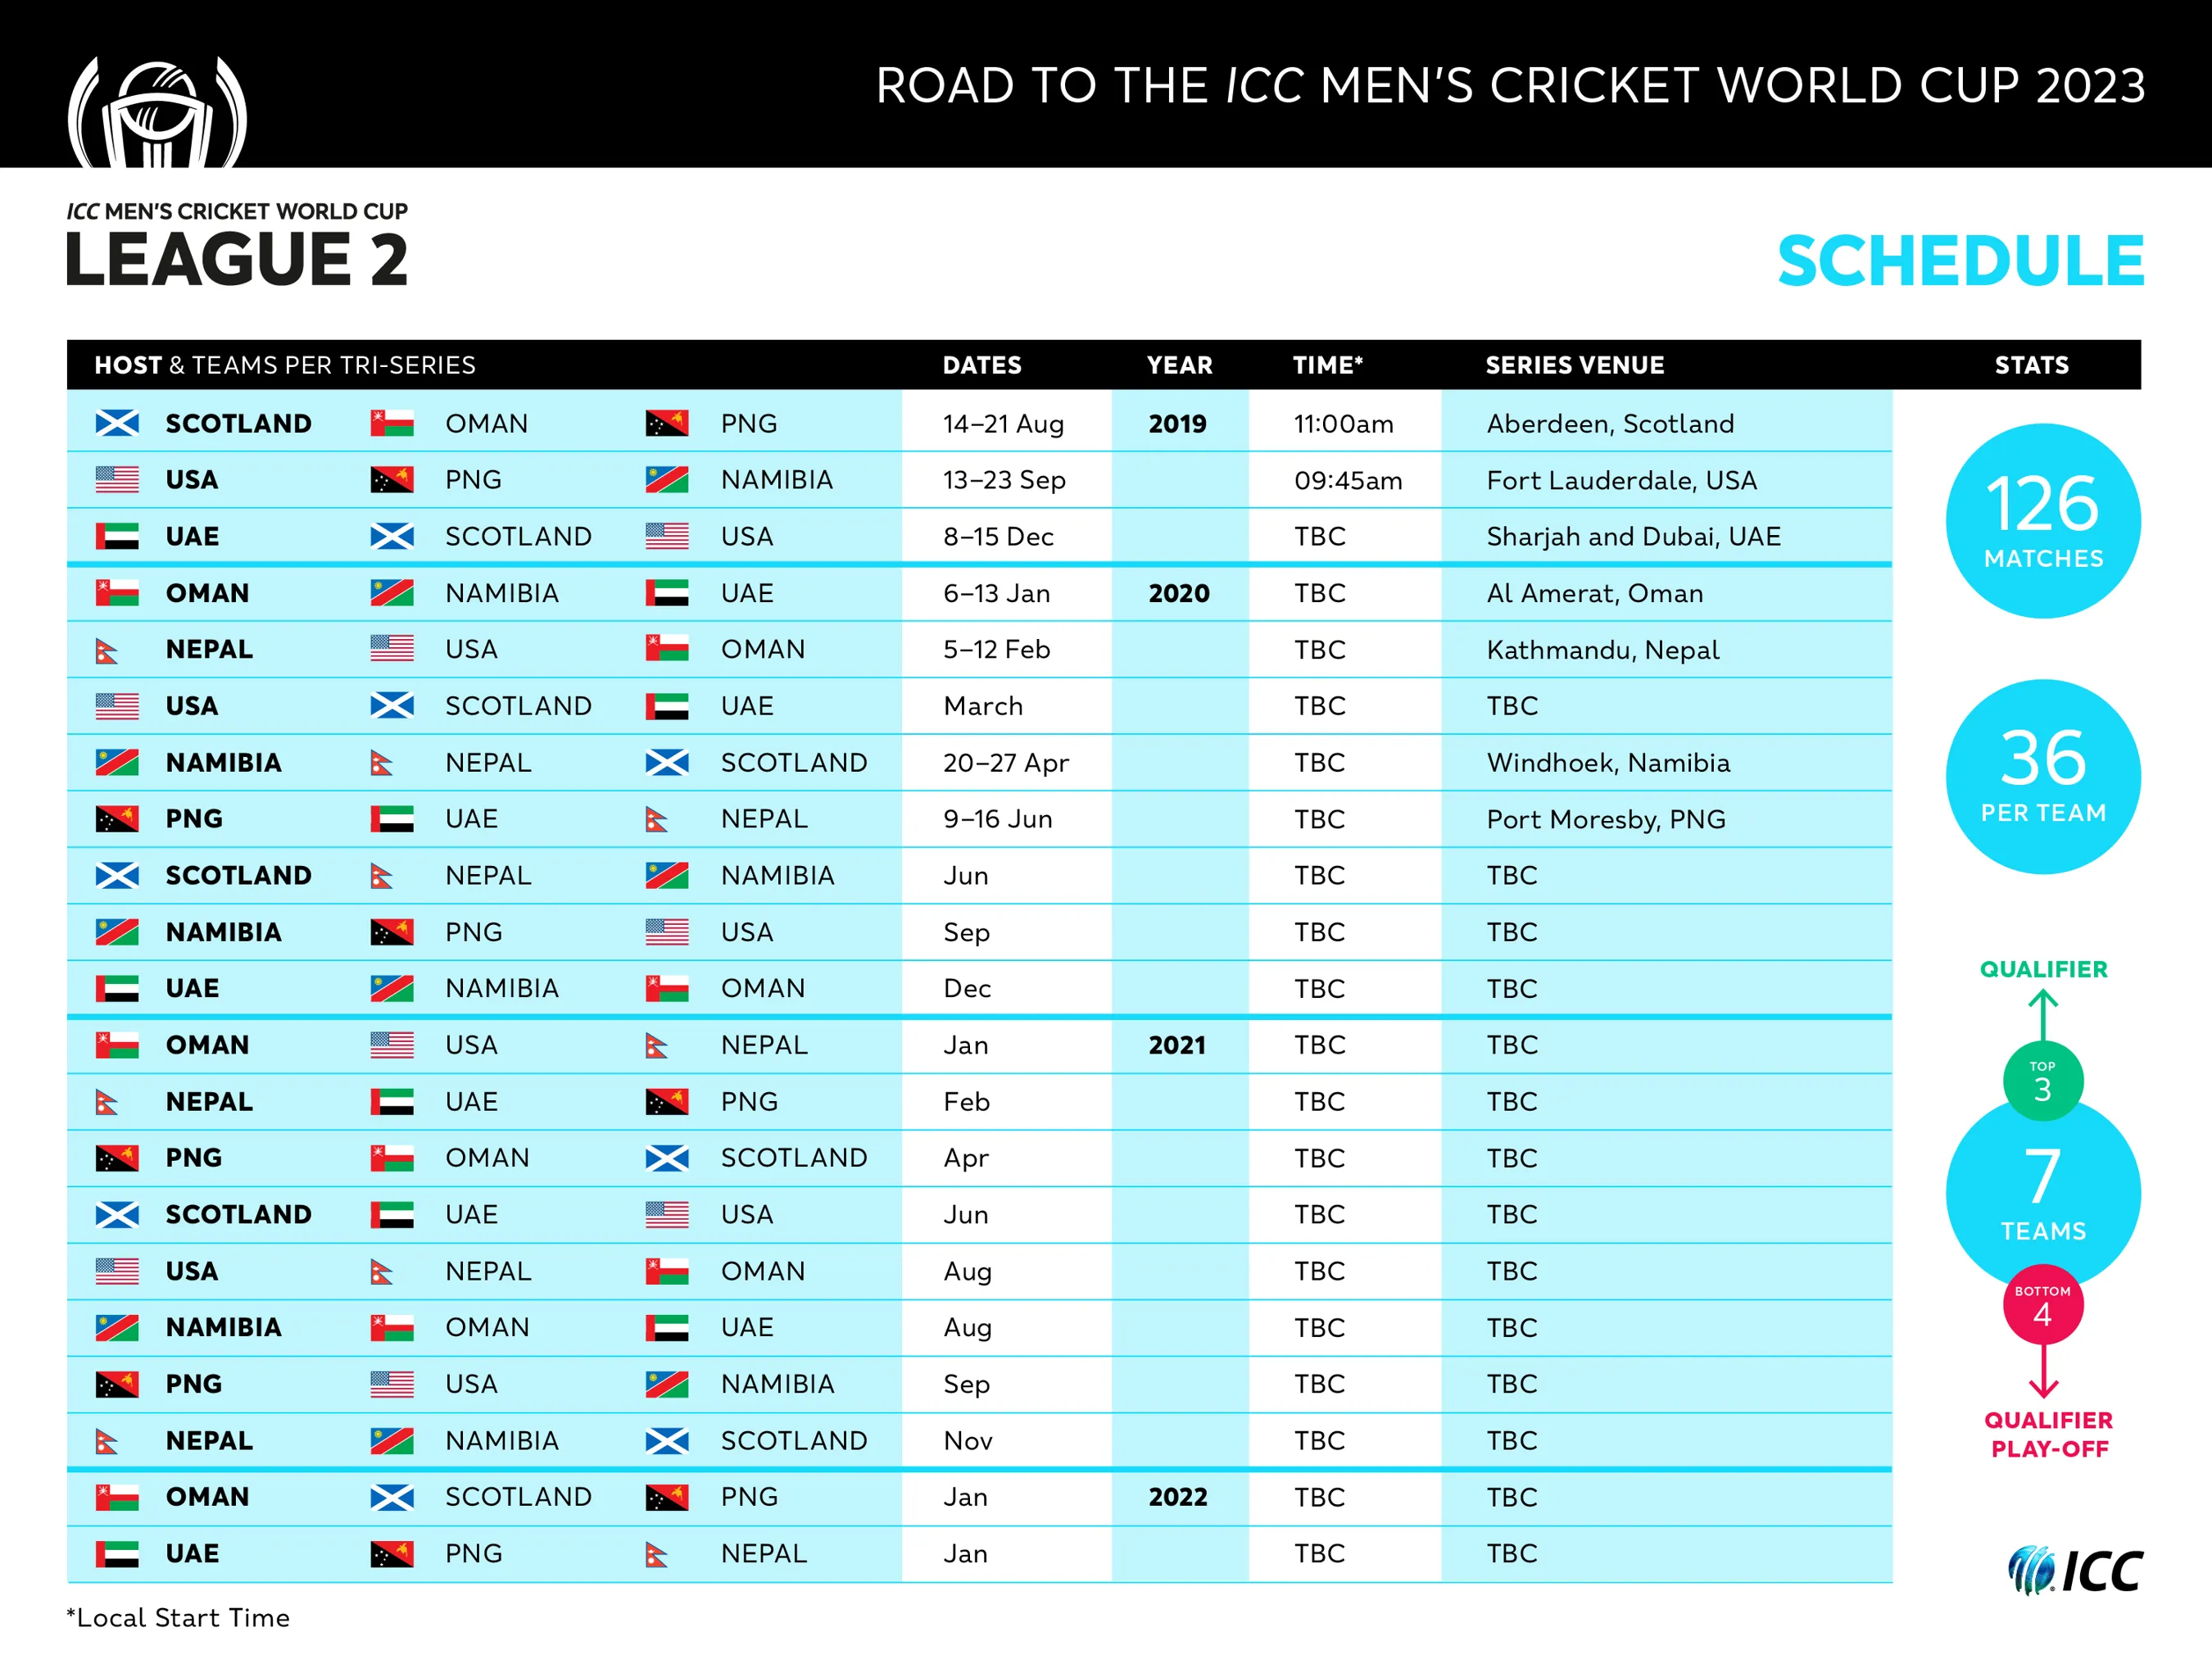 How about cricket world cup qualifiers super six?